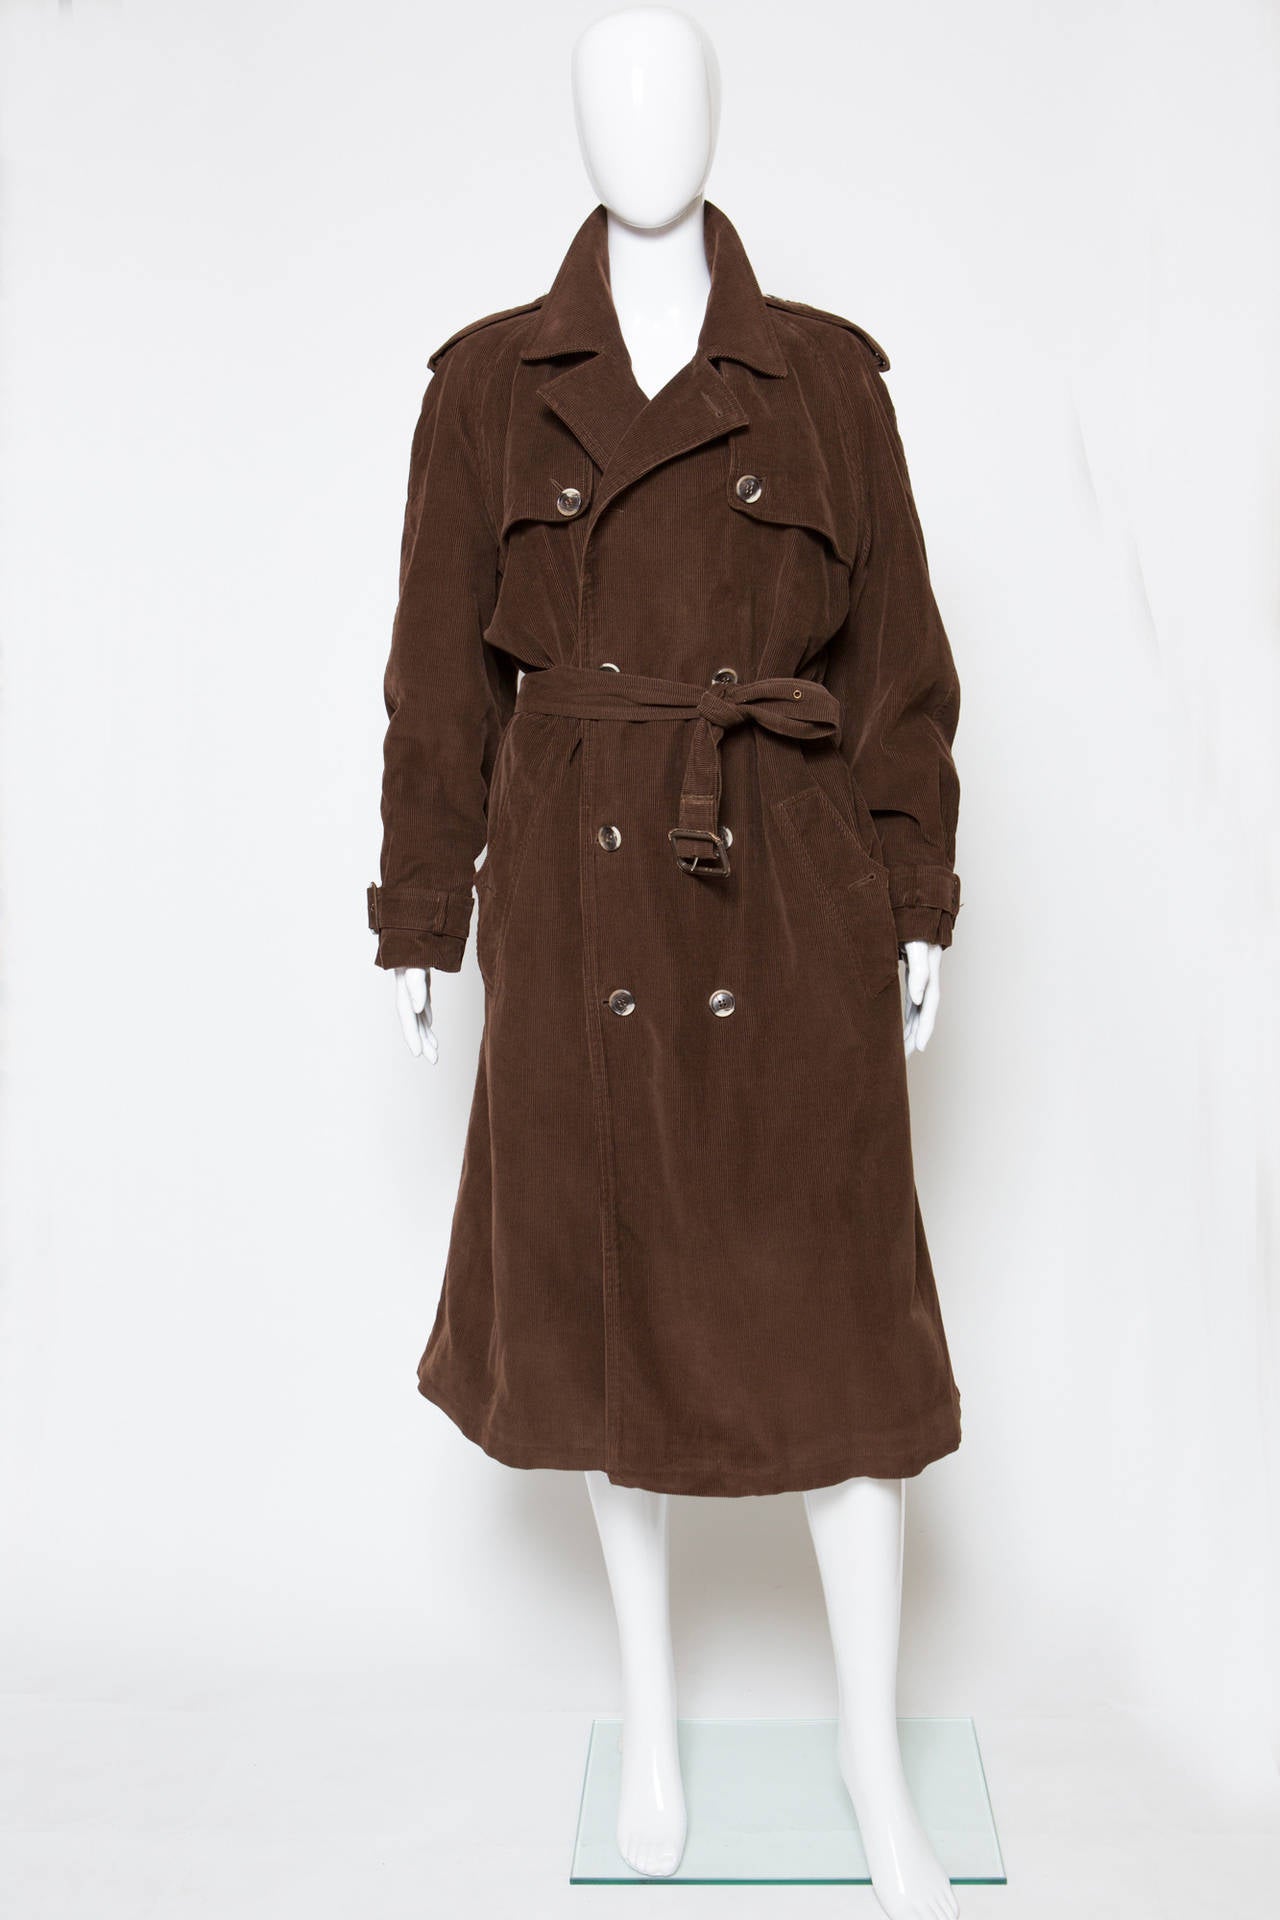 1967s rare chocolate brown Yves Saint Laurent velvet cotton classic trench featuring notched lapels, a double breasted front fastening, a belted waist, side pockets, long sleeves, a storm flap and a soft quilted lining. This trench is a fantastic